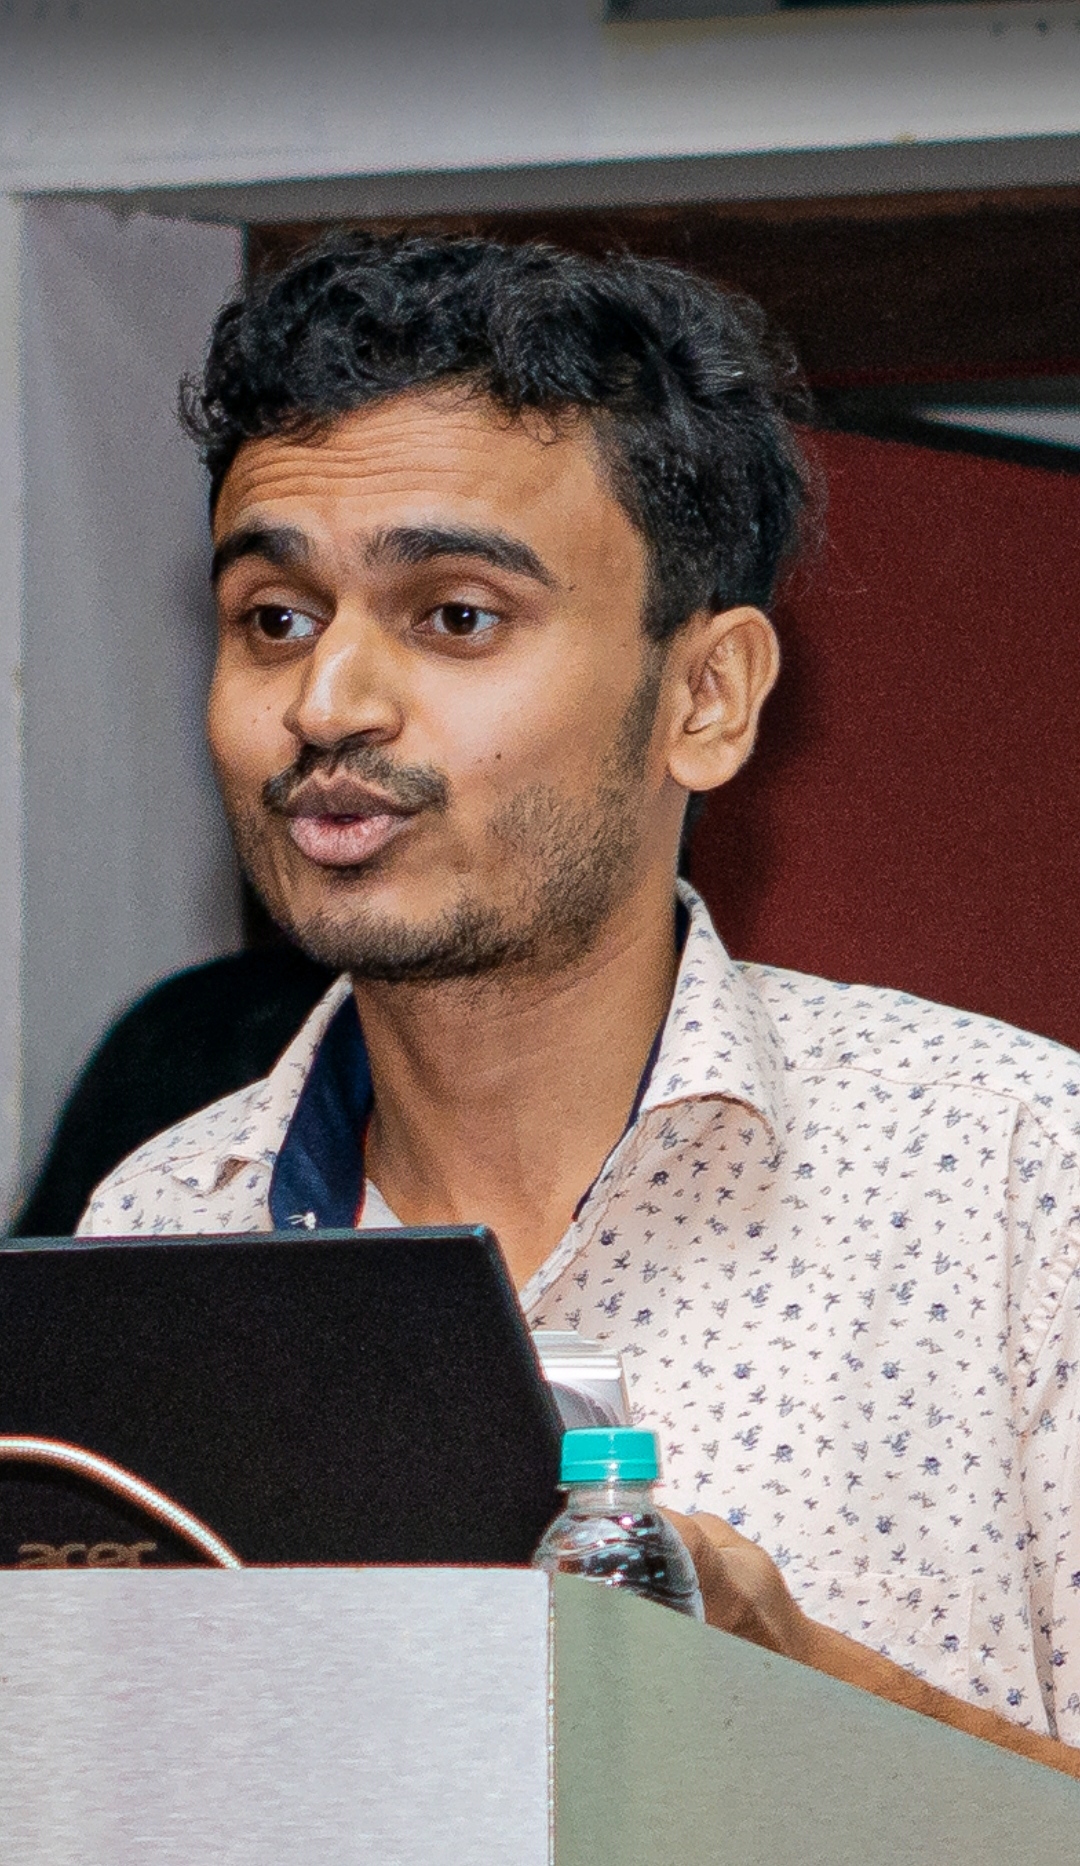 Puneet Singh Singhal Talking at a conference.